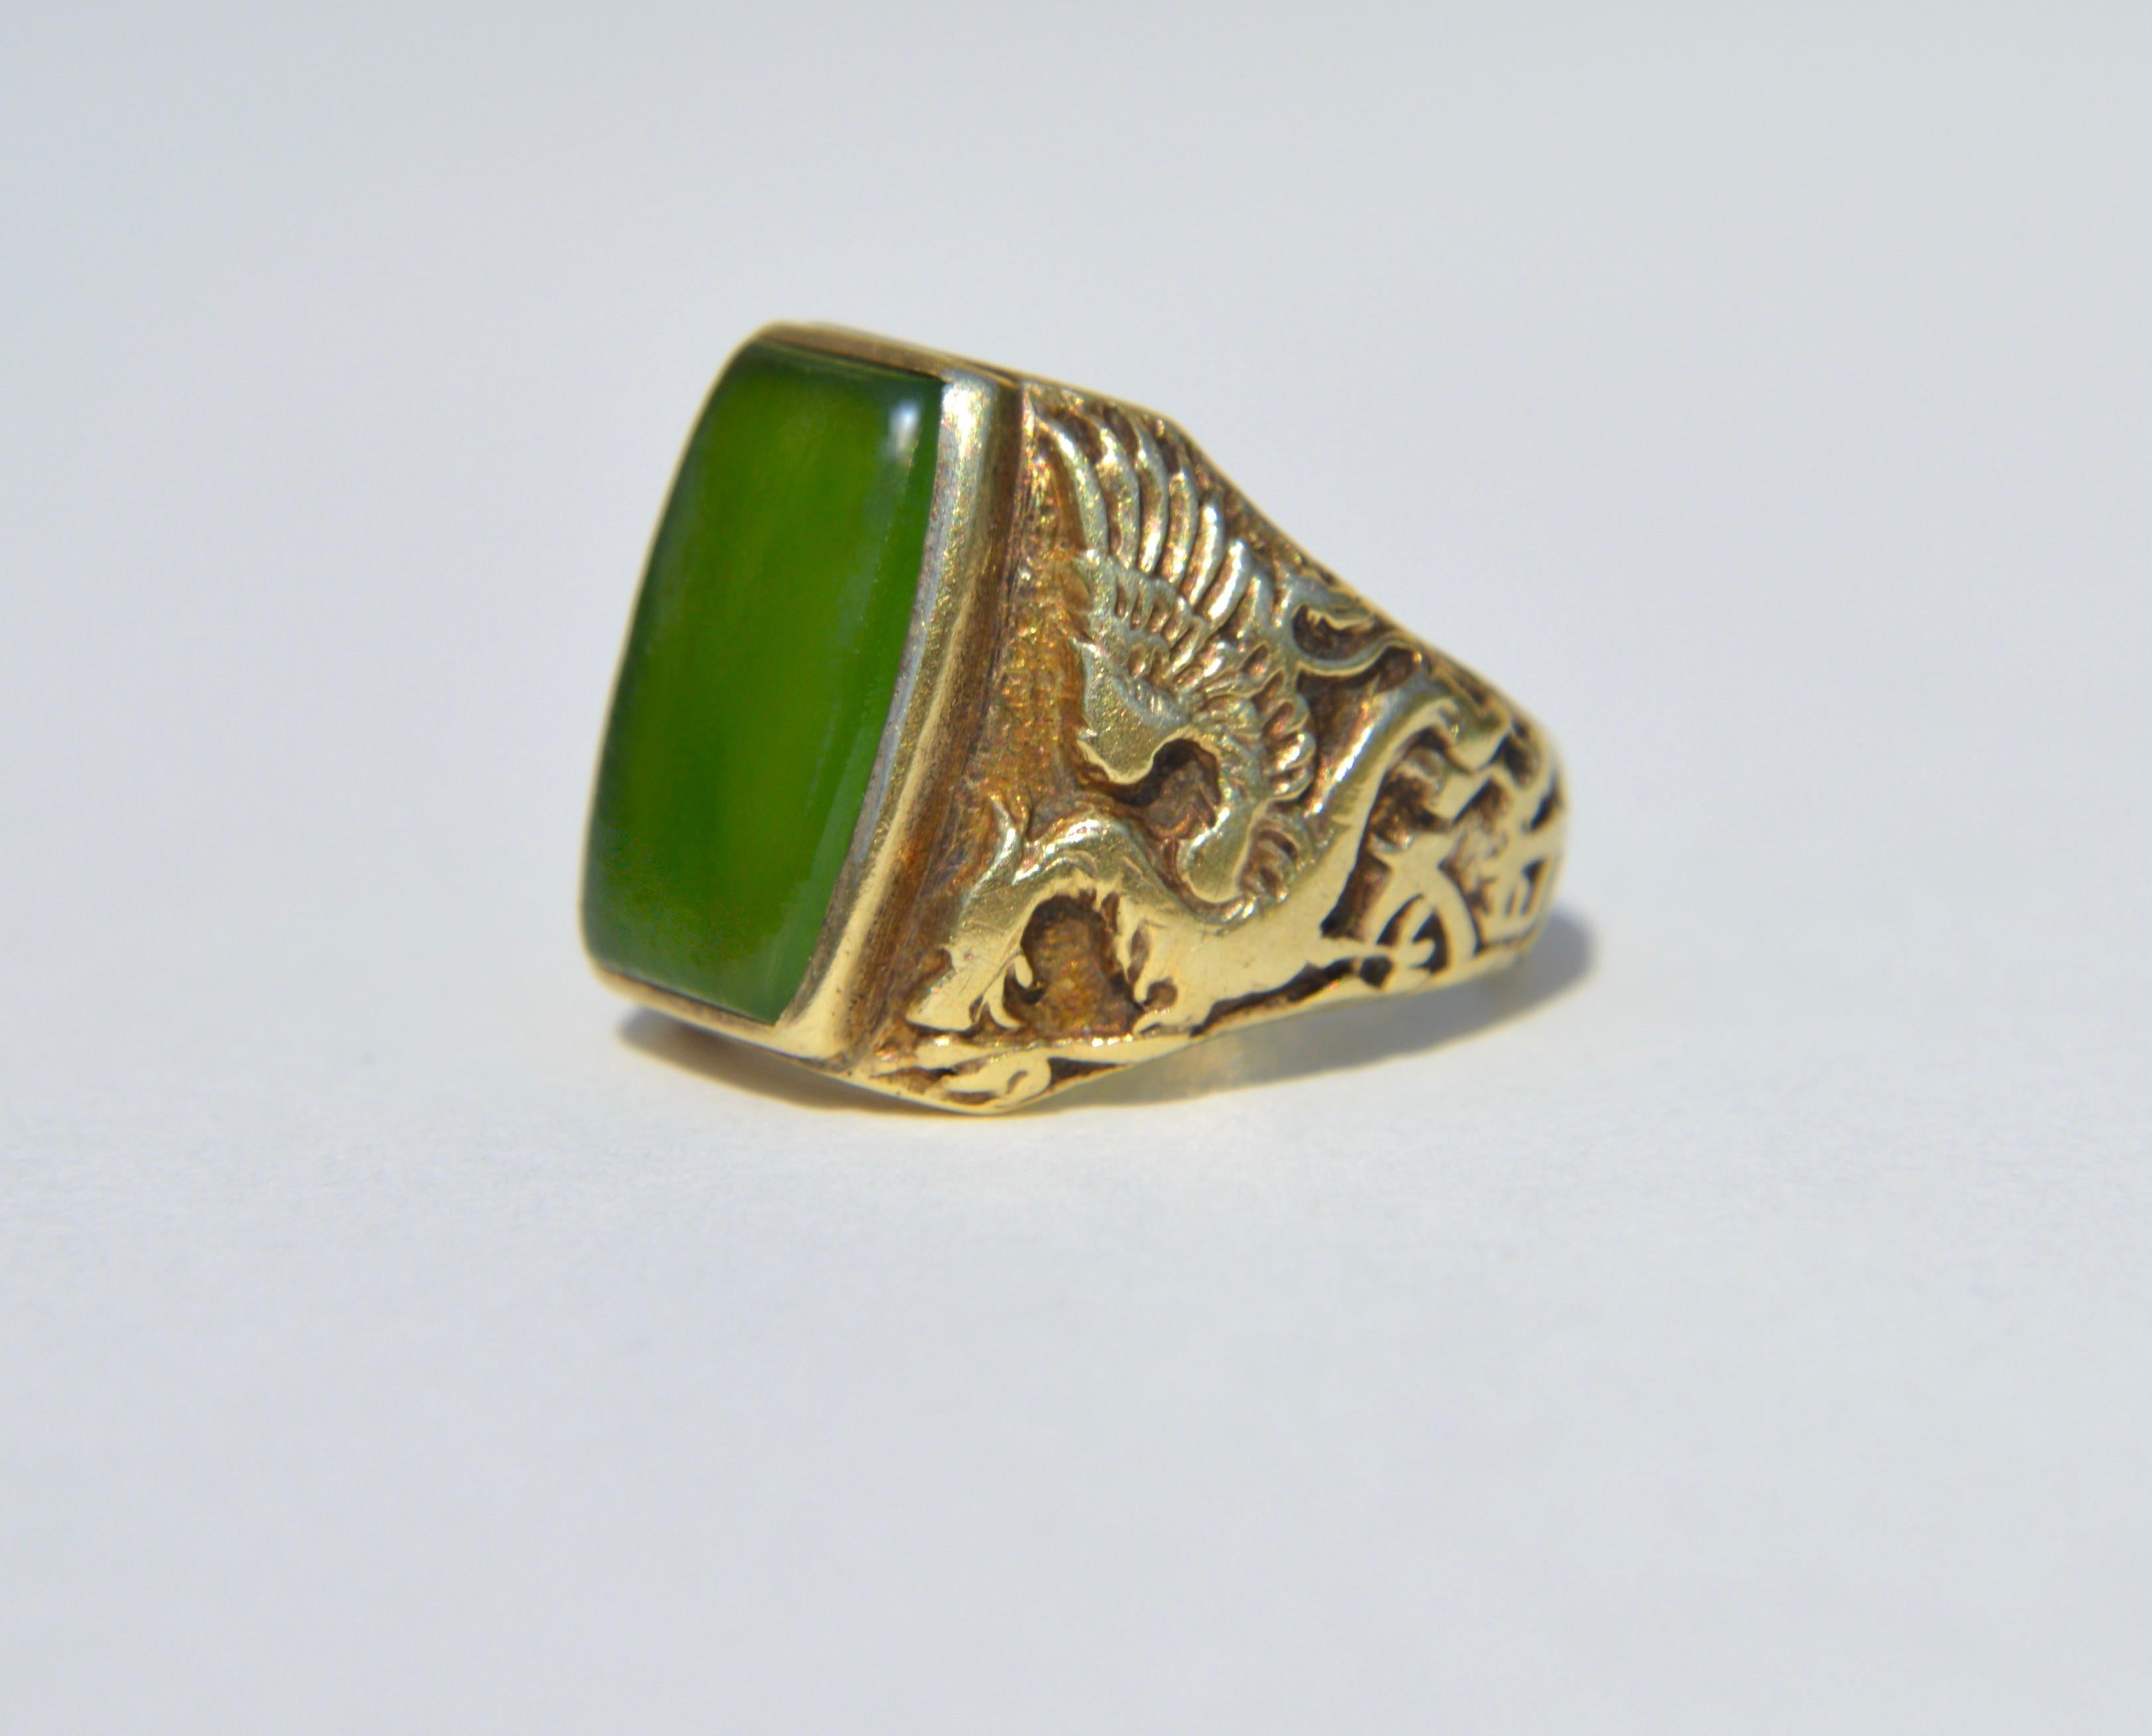 Exceptional and rare Edwardian era circa early 1900s nephrite jade 14K yellow gold griffin shouldered signet ring in size 3.75, perfect for a pinky ring. Can be resized up to 3 sizes up by a jeweler. In good condition. Marked as 14K (faint stamp)